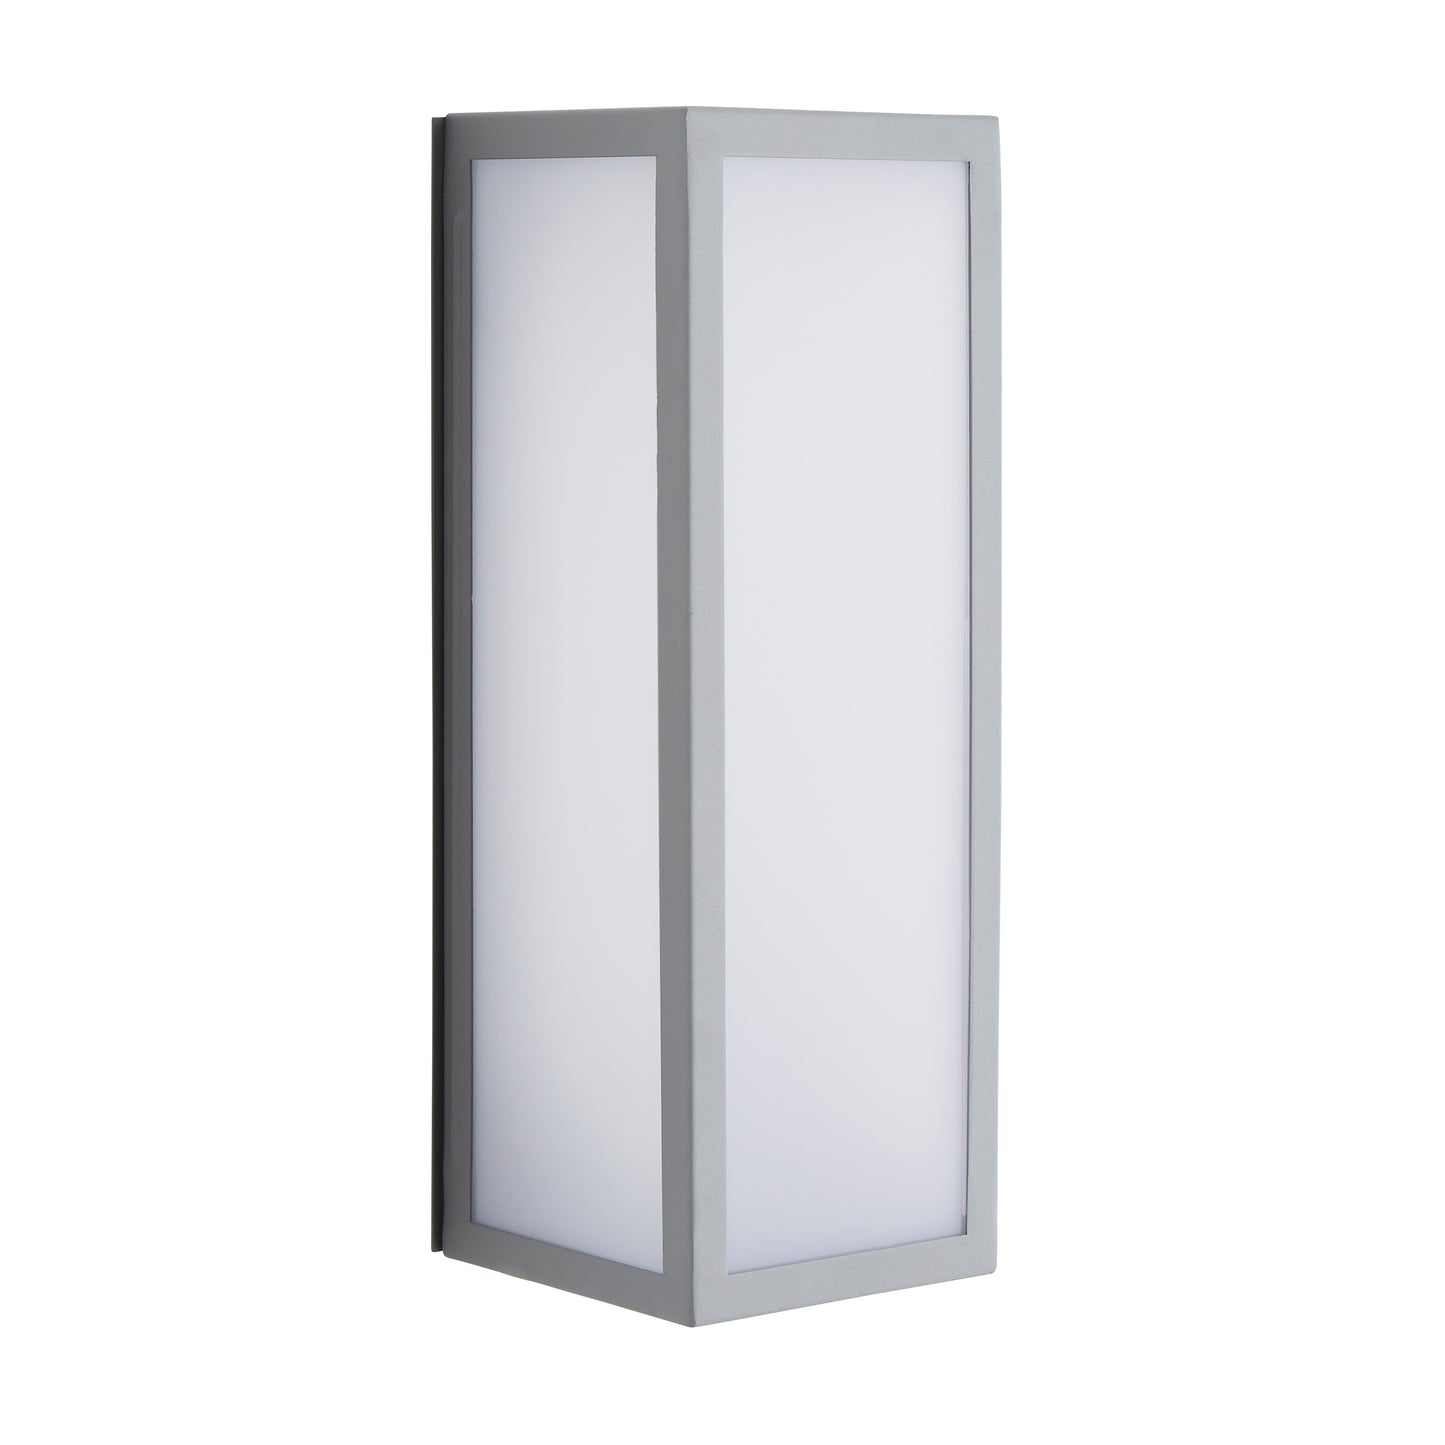 A modern take on a traditional design outdoor wall light perfect for adding style and security The traditional front-door lantern has had a modern make over in the form of our Harri  outdoor wall light with its square silver stainless steel construction and completed with opal polycarbonate windows this light this is sure to add an statement to any wall. 